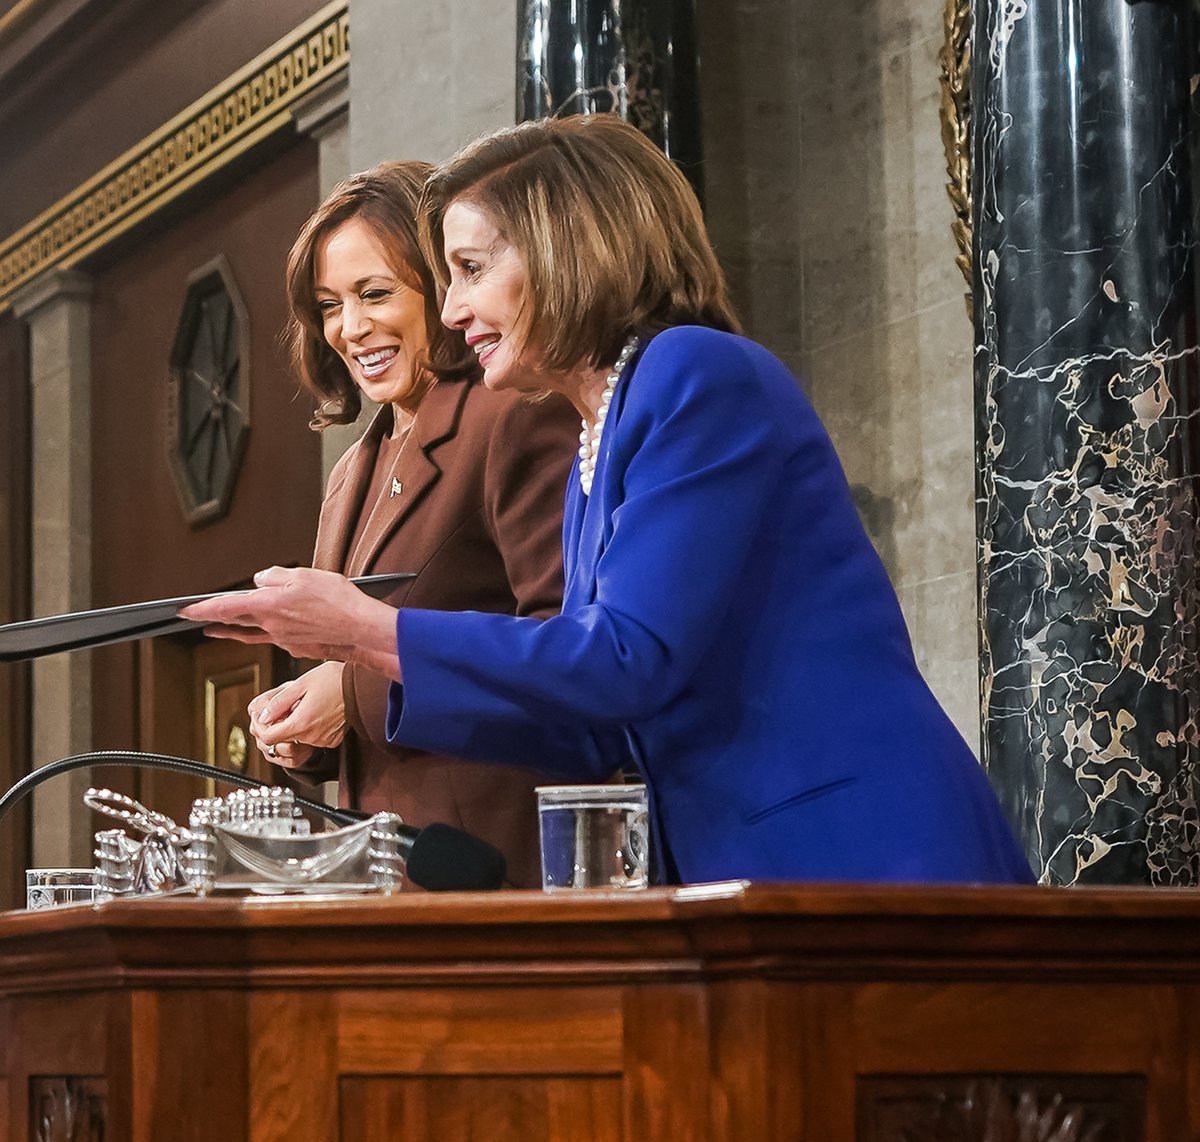 In the last two years, because of @SpeakerPelosi's partnership, President Biden and I have made historic progress: the largest economic recovery since FDR, the largest infrastructure investments since President Eisenhower, and the largest climate investment in America's history.